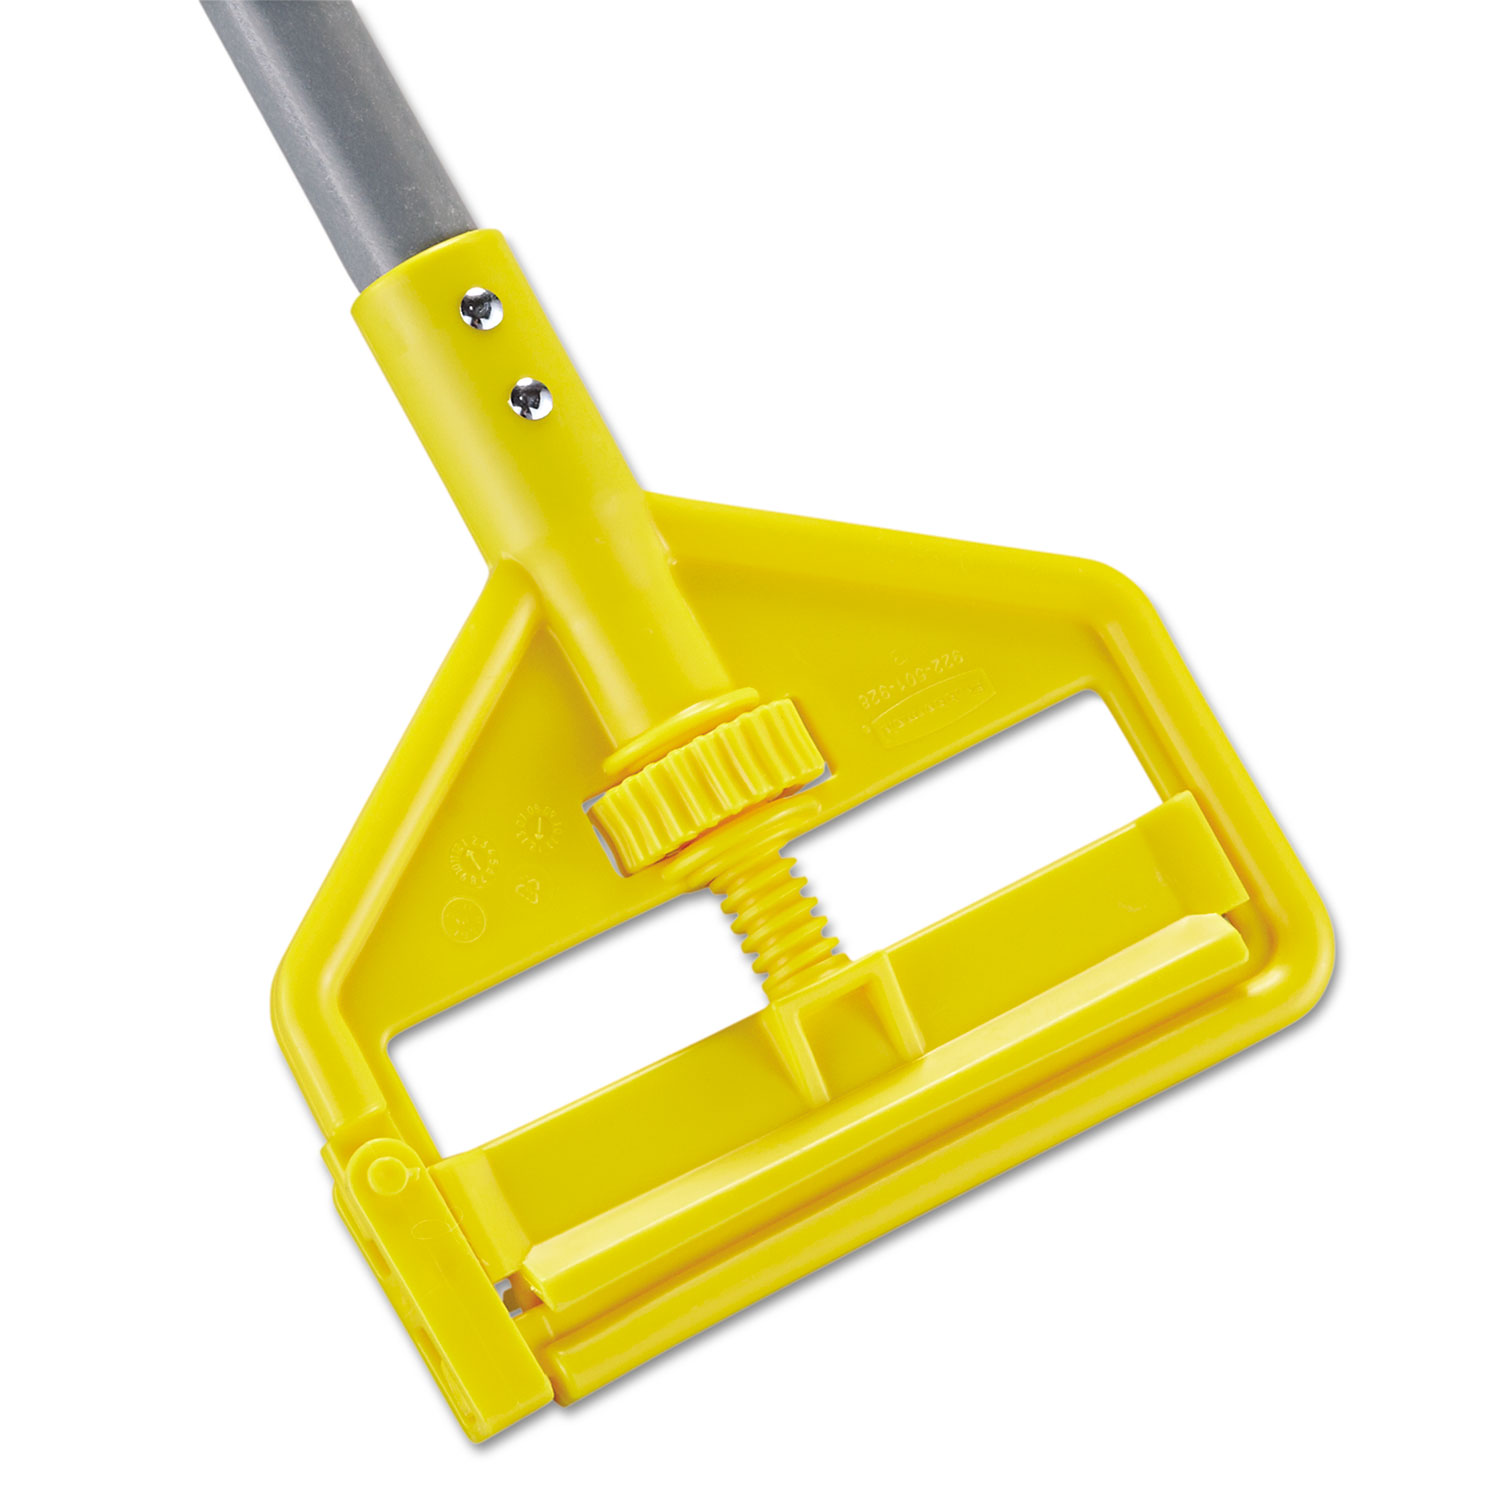  Rubbermaid Commercial FGH135000000 Invader Aluminum Side-Gate Wet-Mop Handle, 1 dia x 54, Gray/Yellow (RCPH135) 